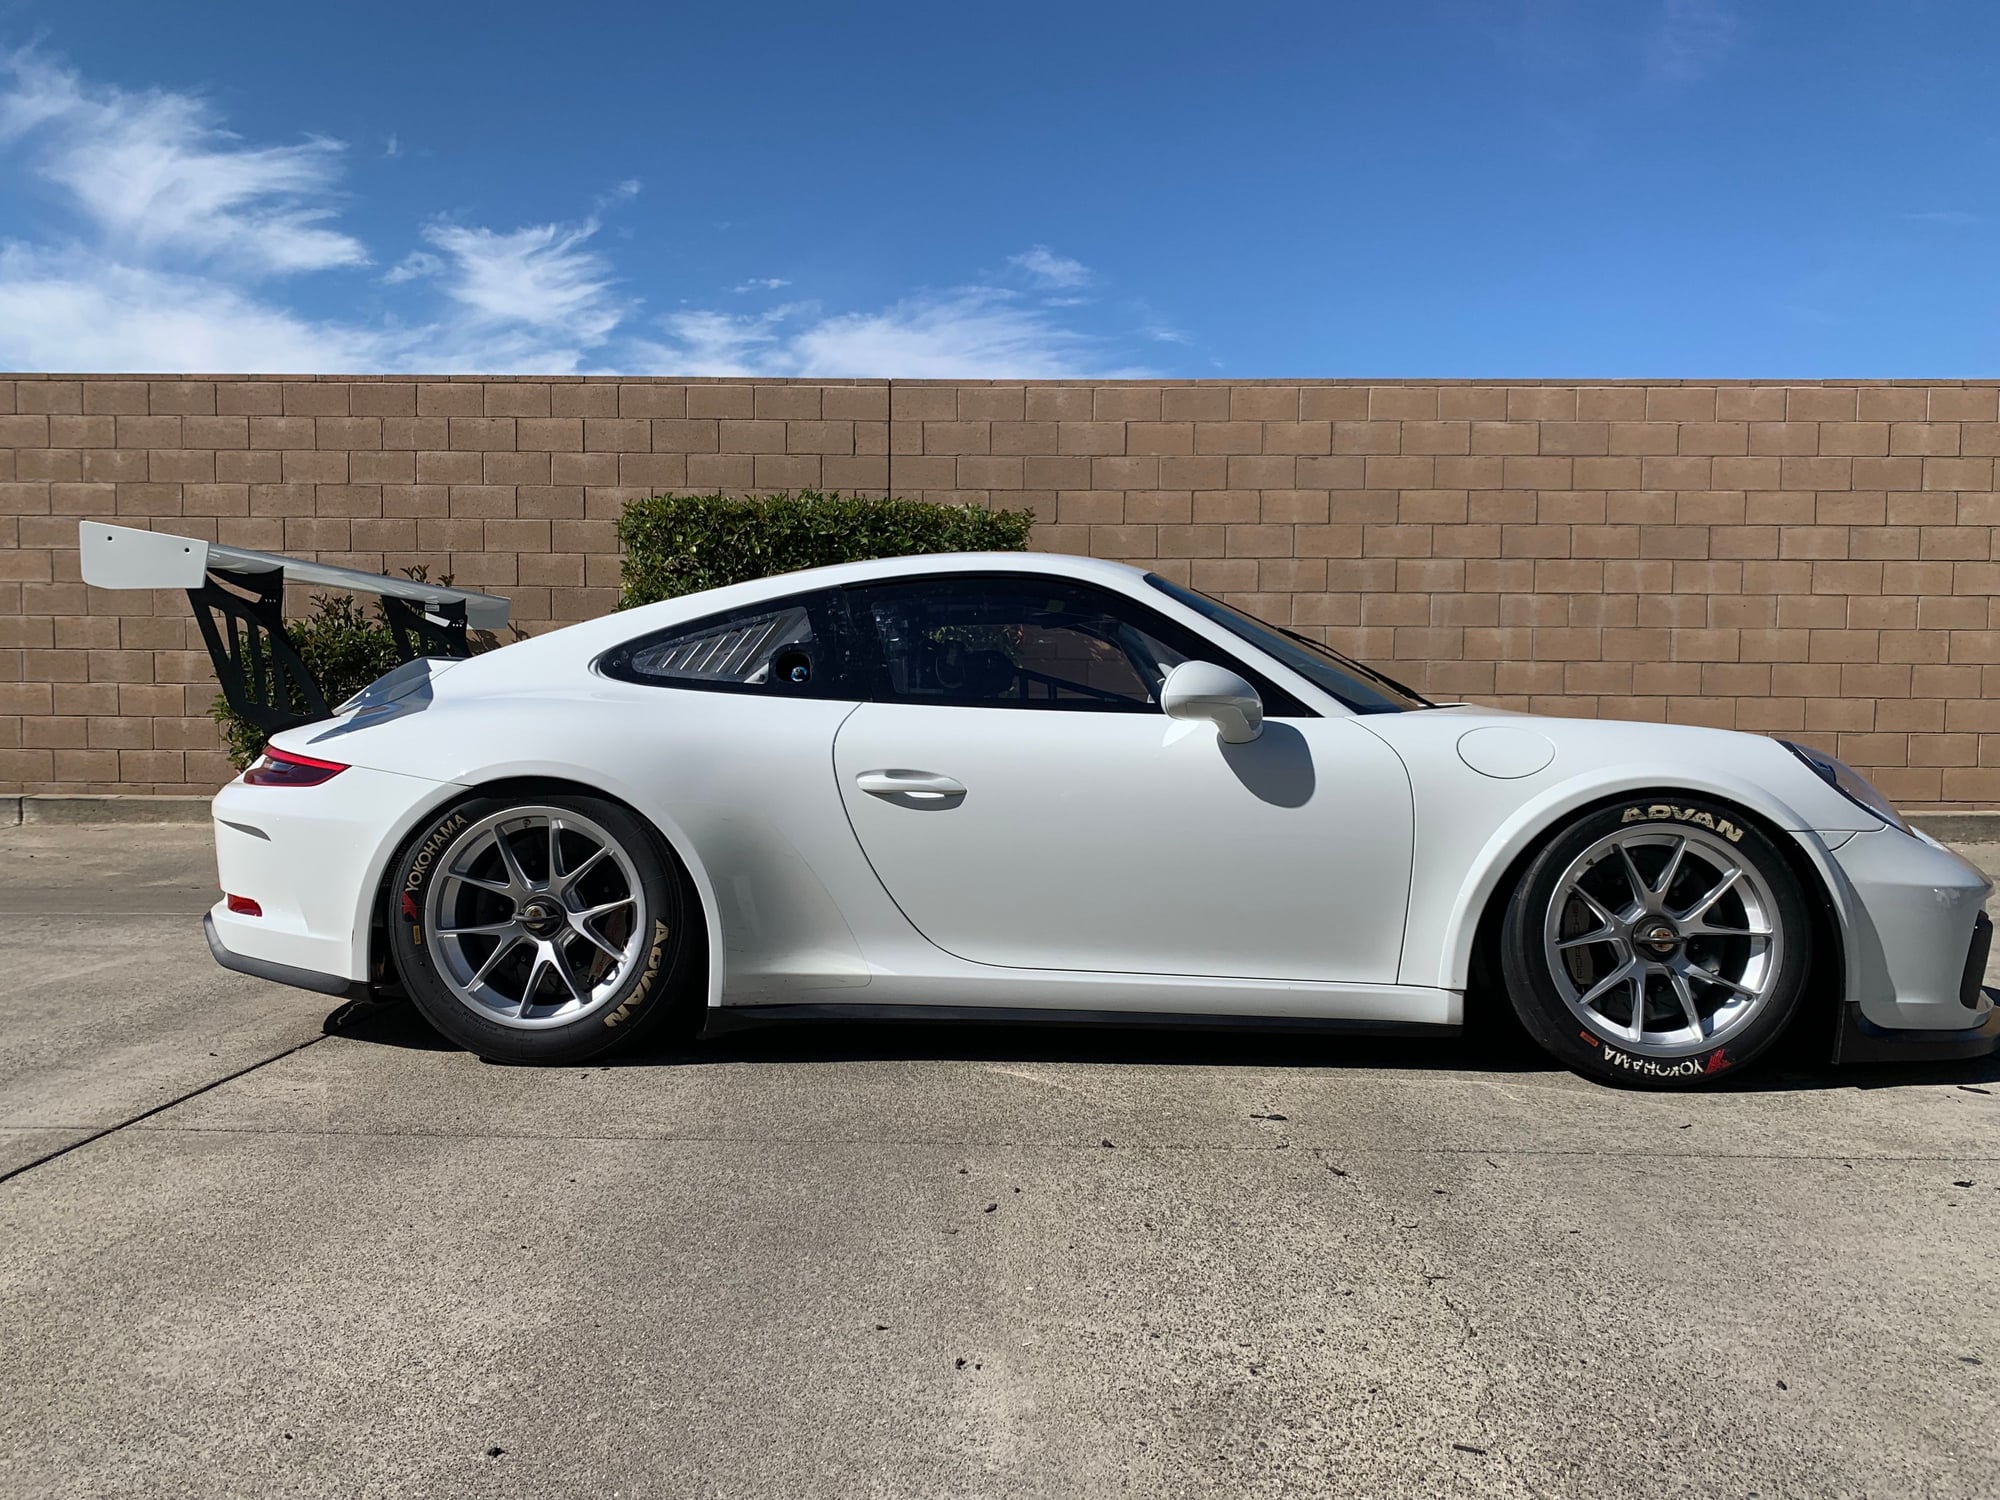 2019 Porsche GT3 - 2019 991.2 GT3 Cup, track days only, 25 hour chassis, 0 hour engine - Used - VIN WP0ZZZ99ZKS198304 - Incline Village, NV 89451, United States